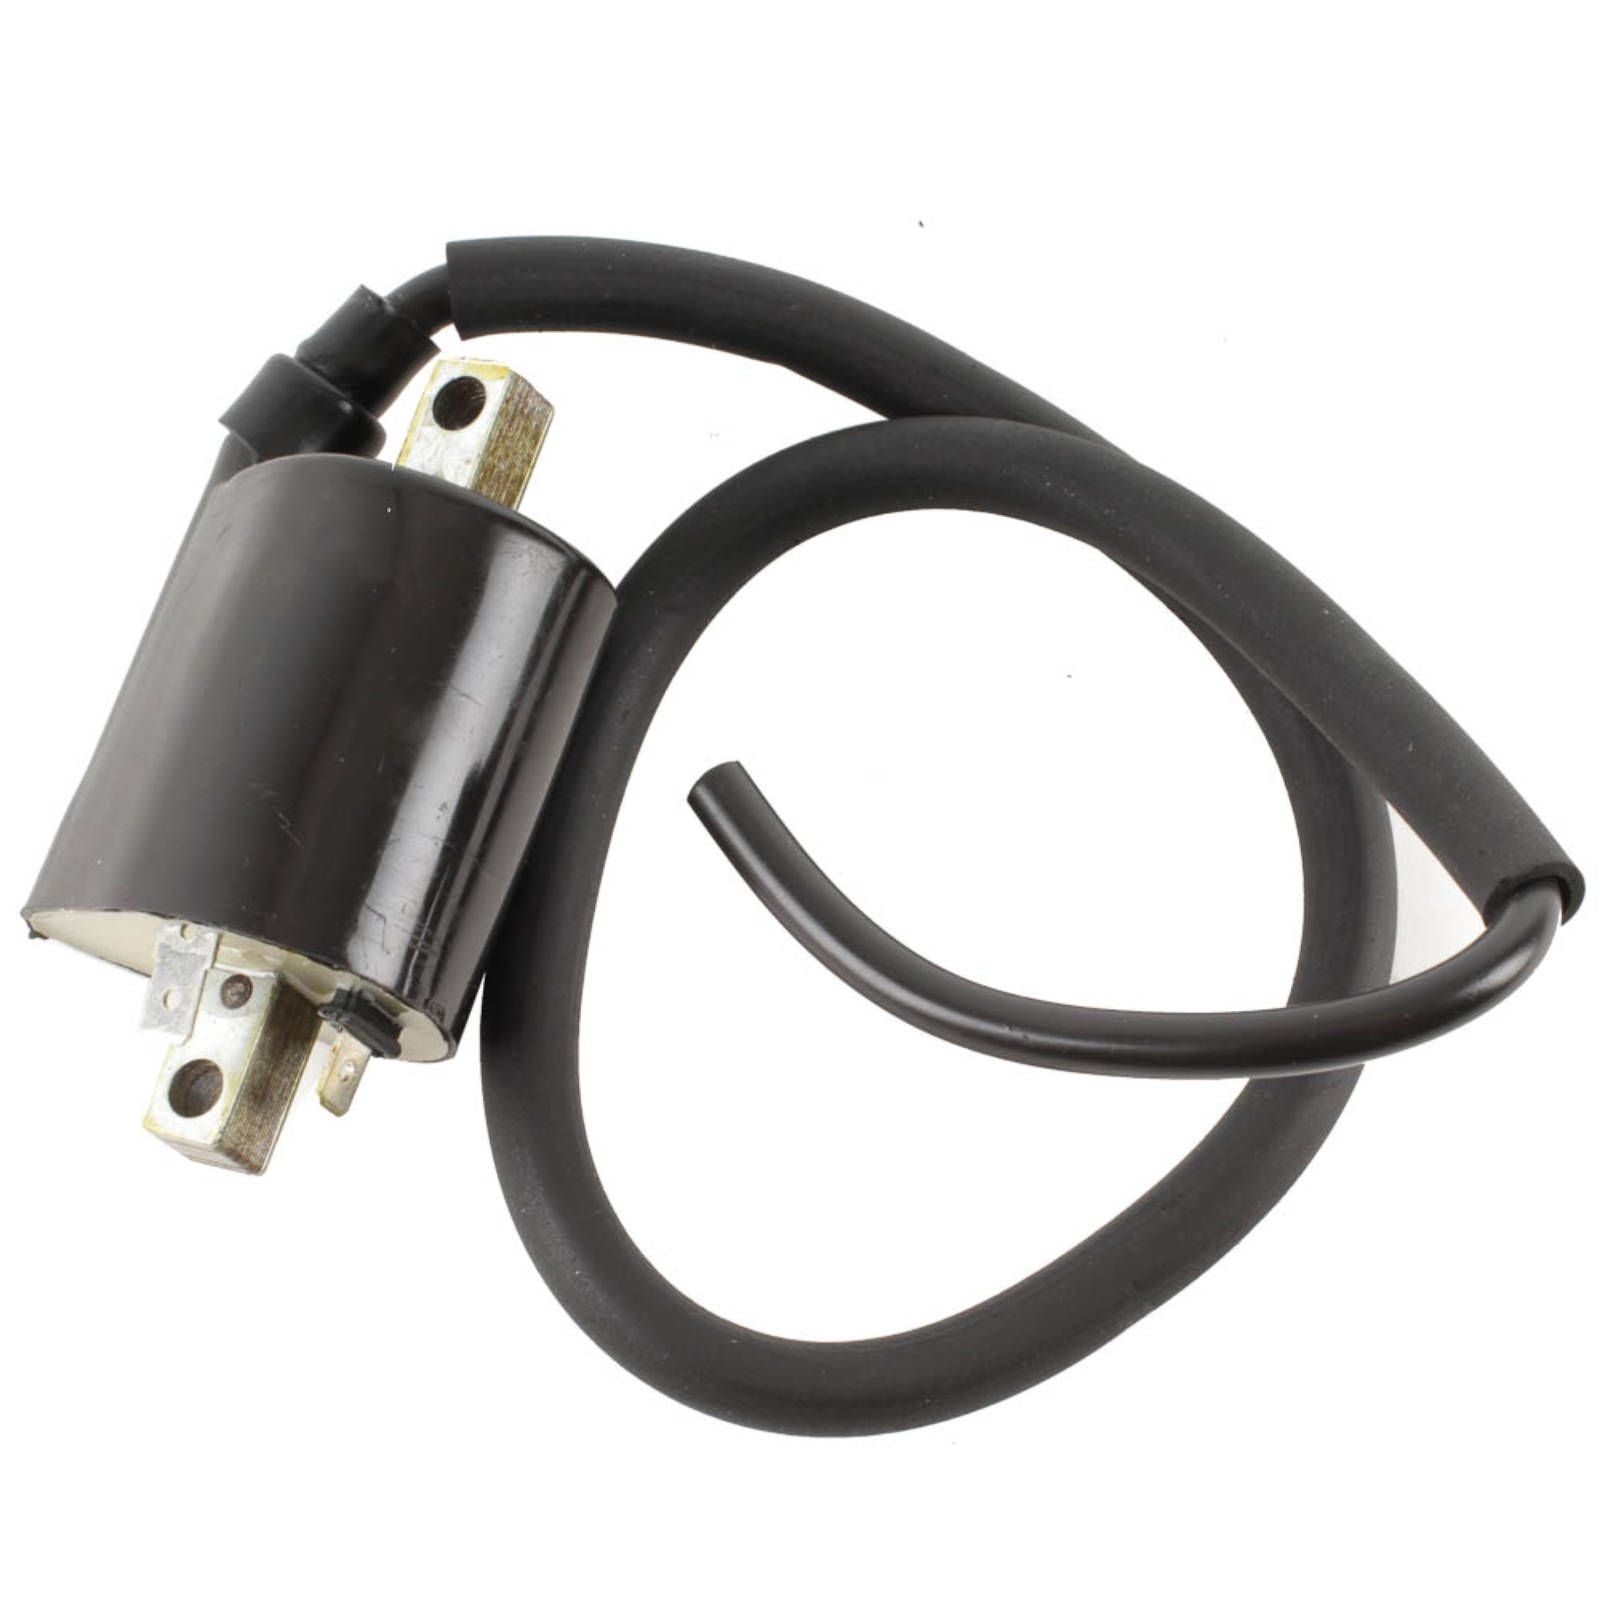 New WHITES Electrical Ignition Coil 12V #WPELC04120133